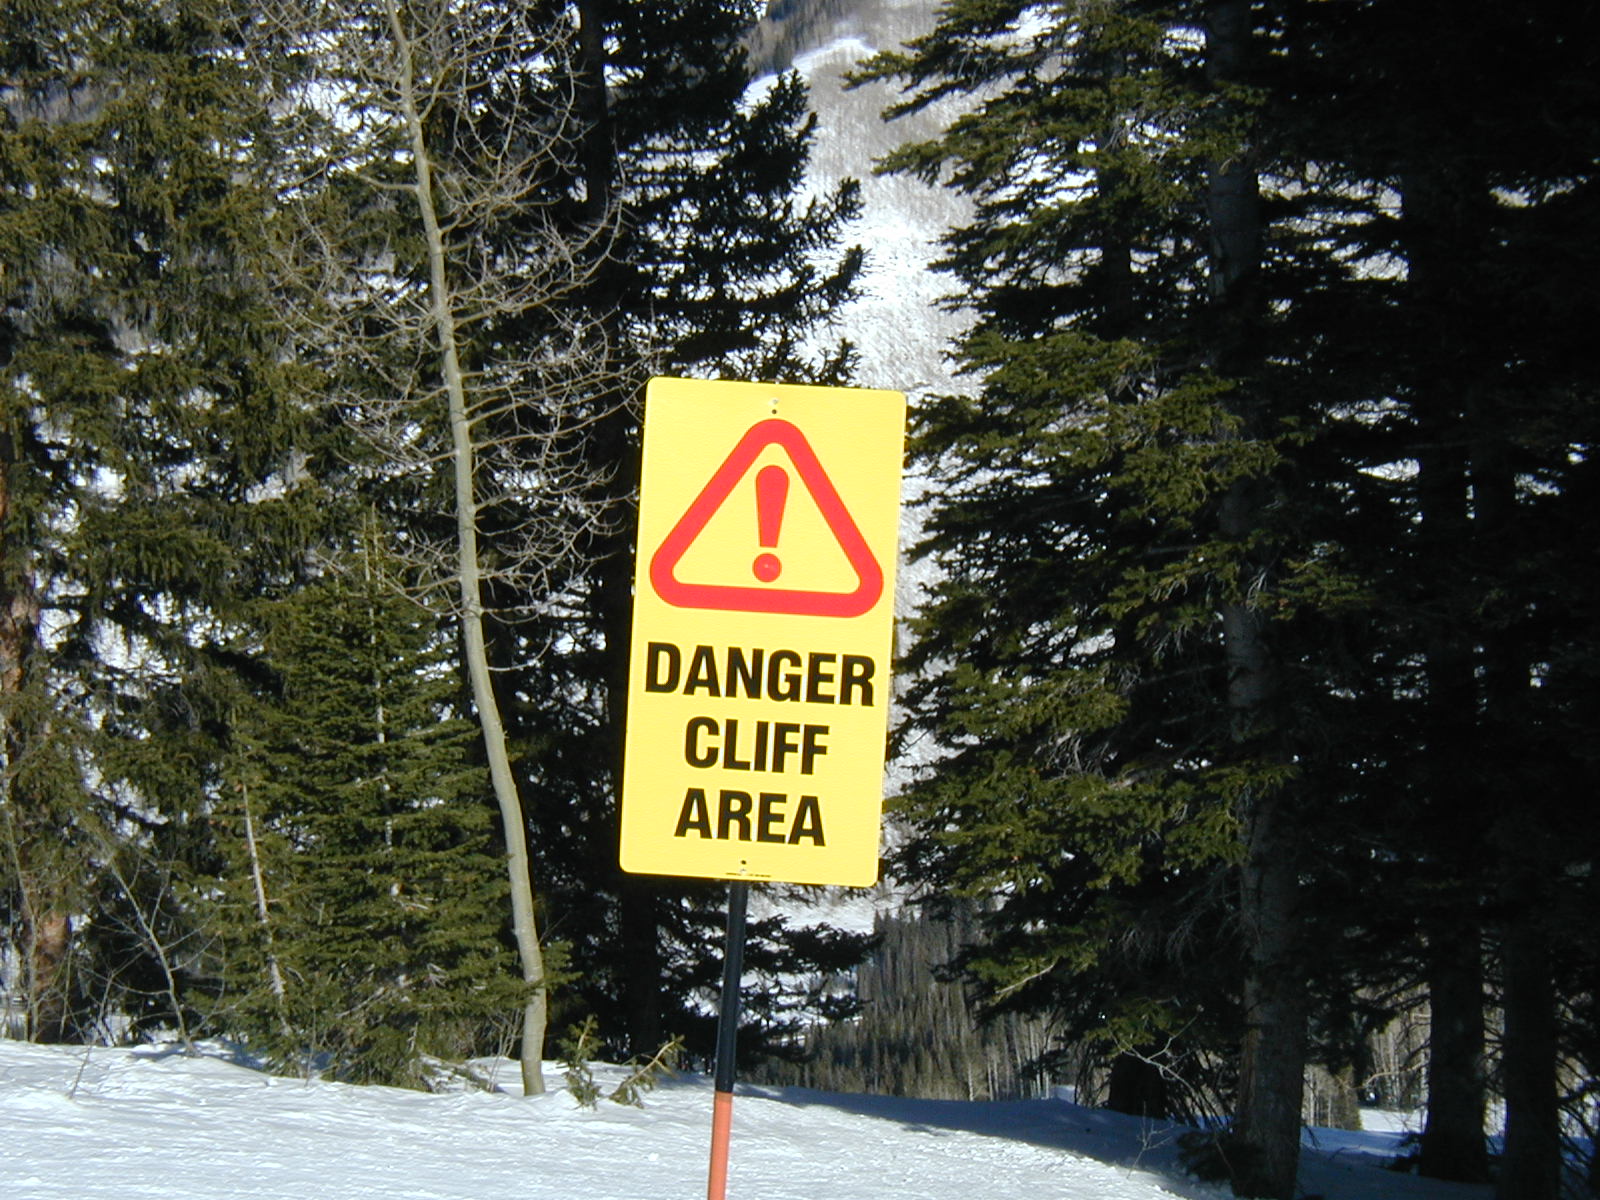 Trail Sign Warning About Cliffs